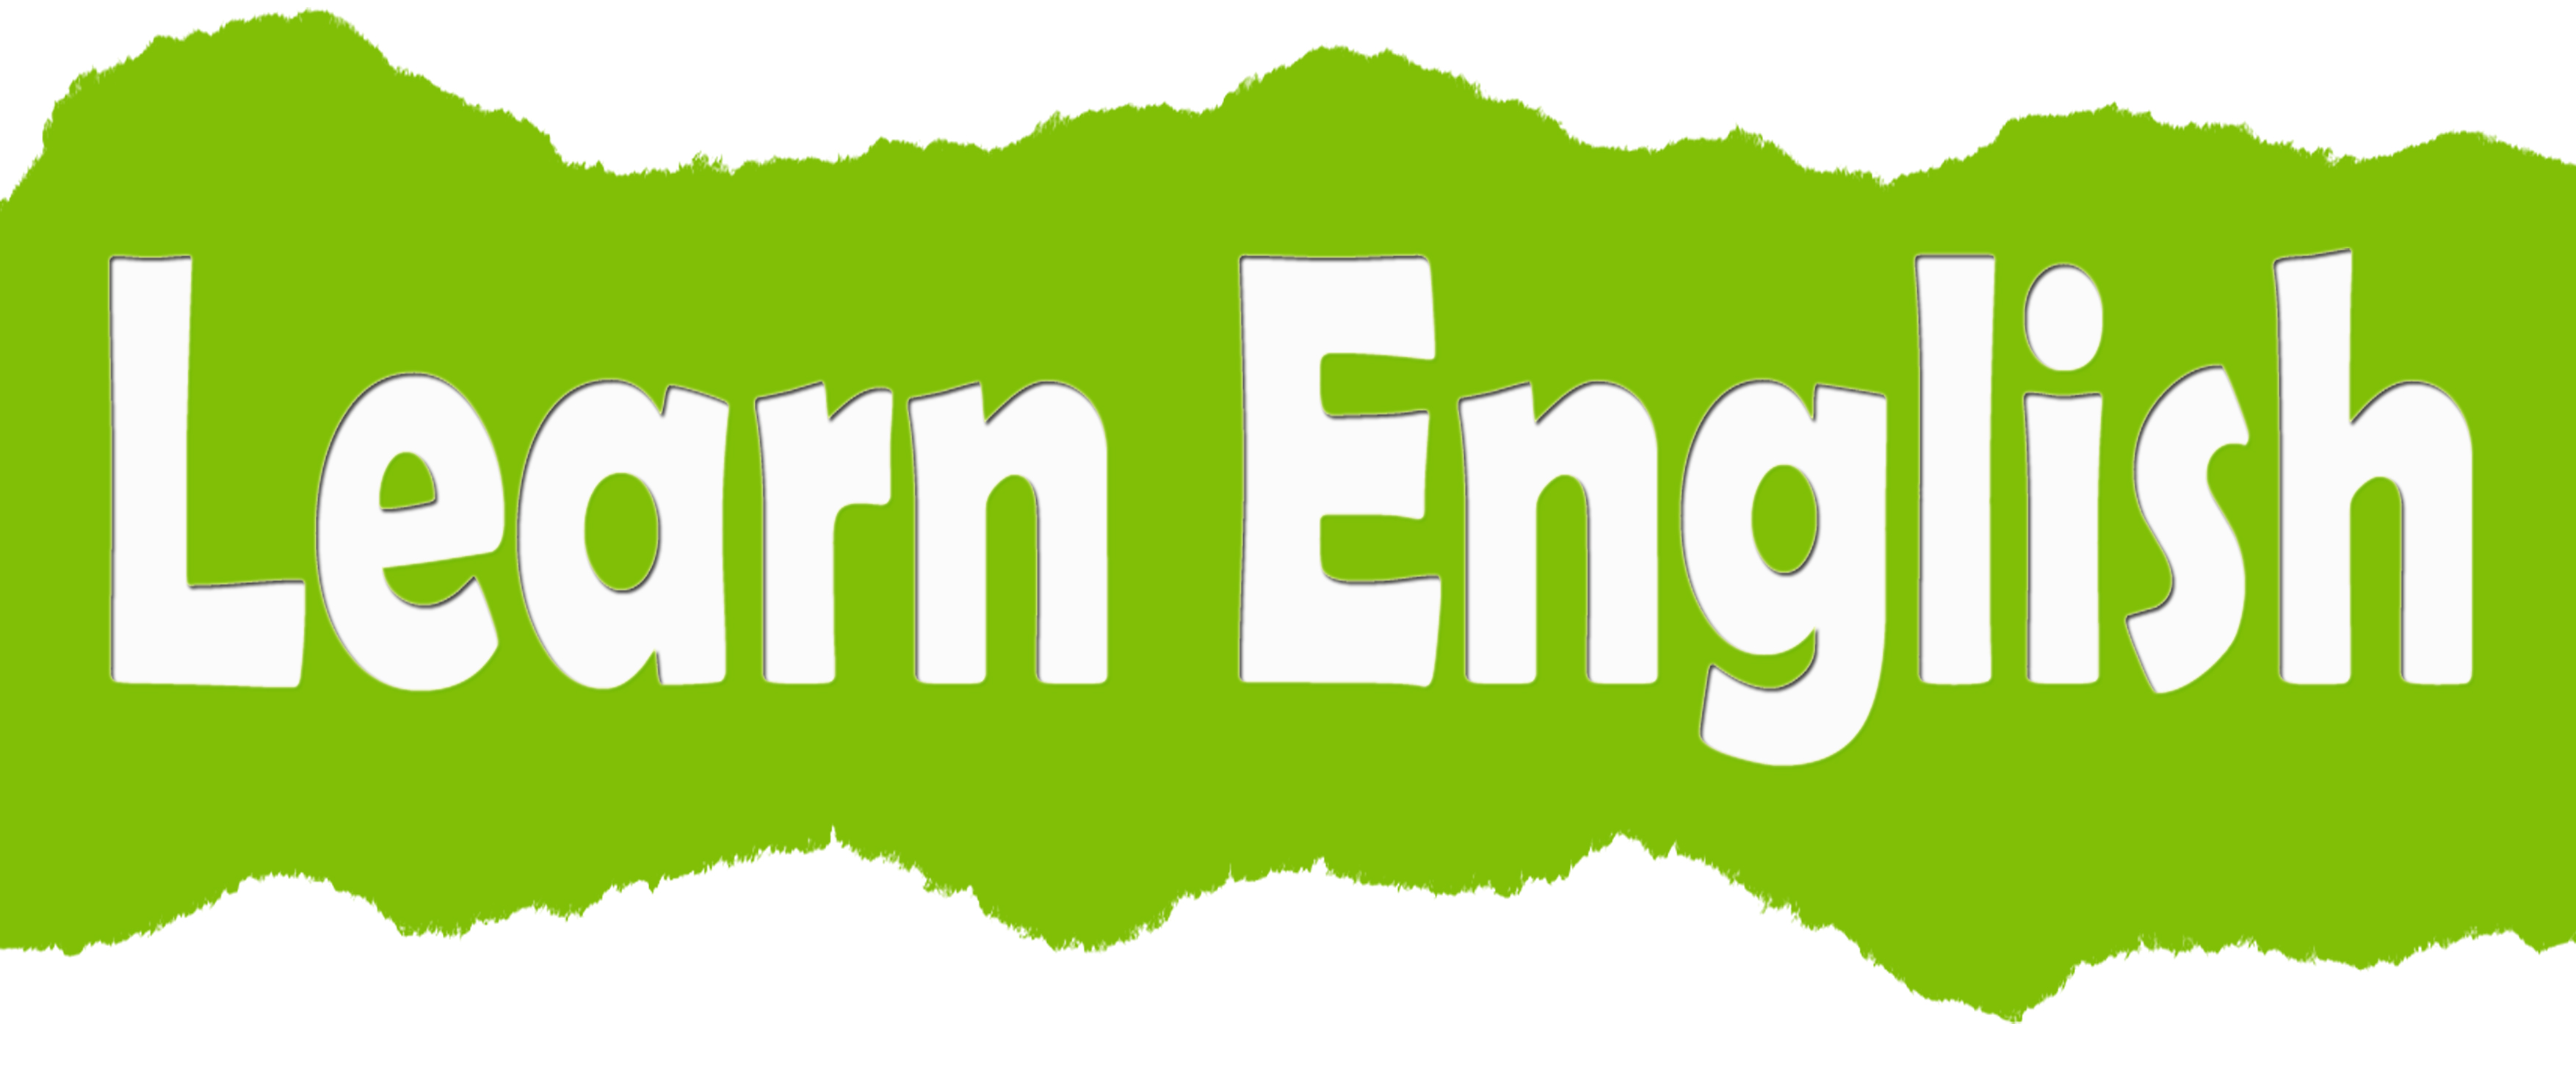 5-easy-ways-to-attend-an-english-course